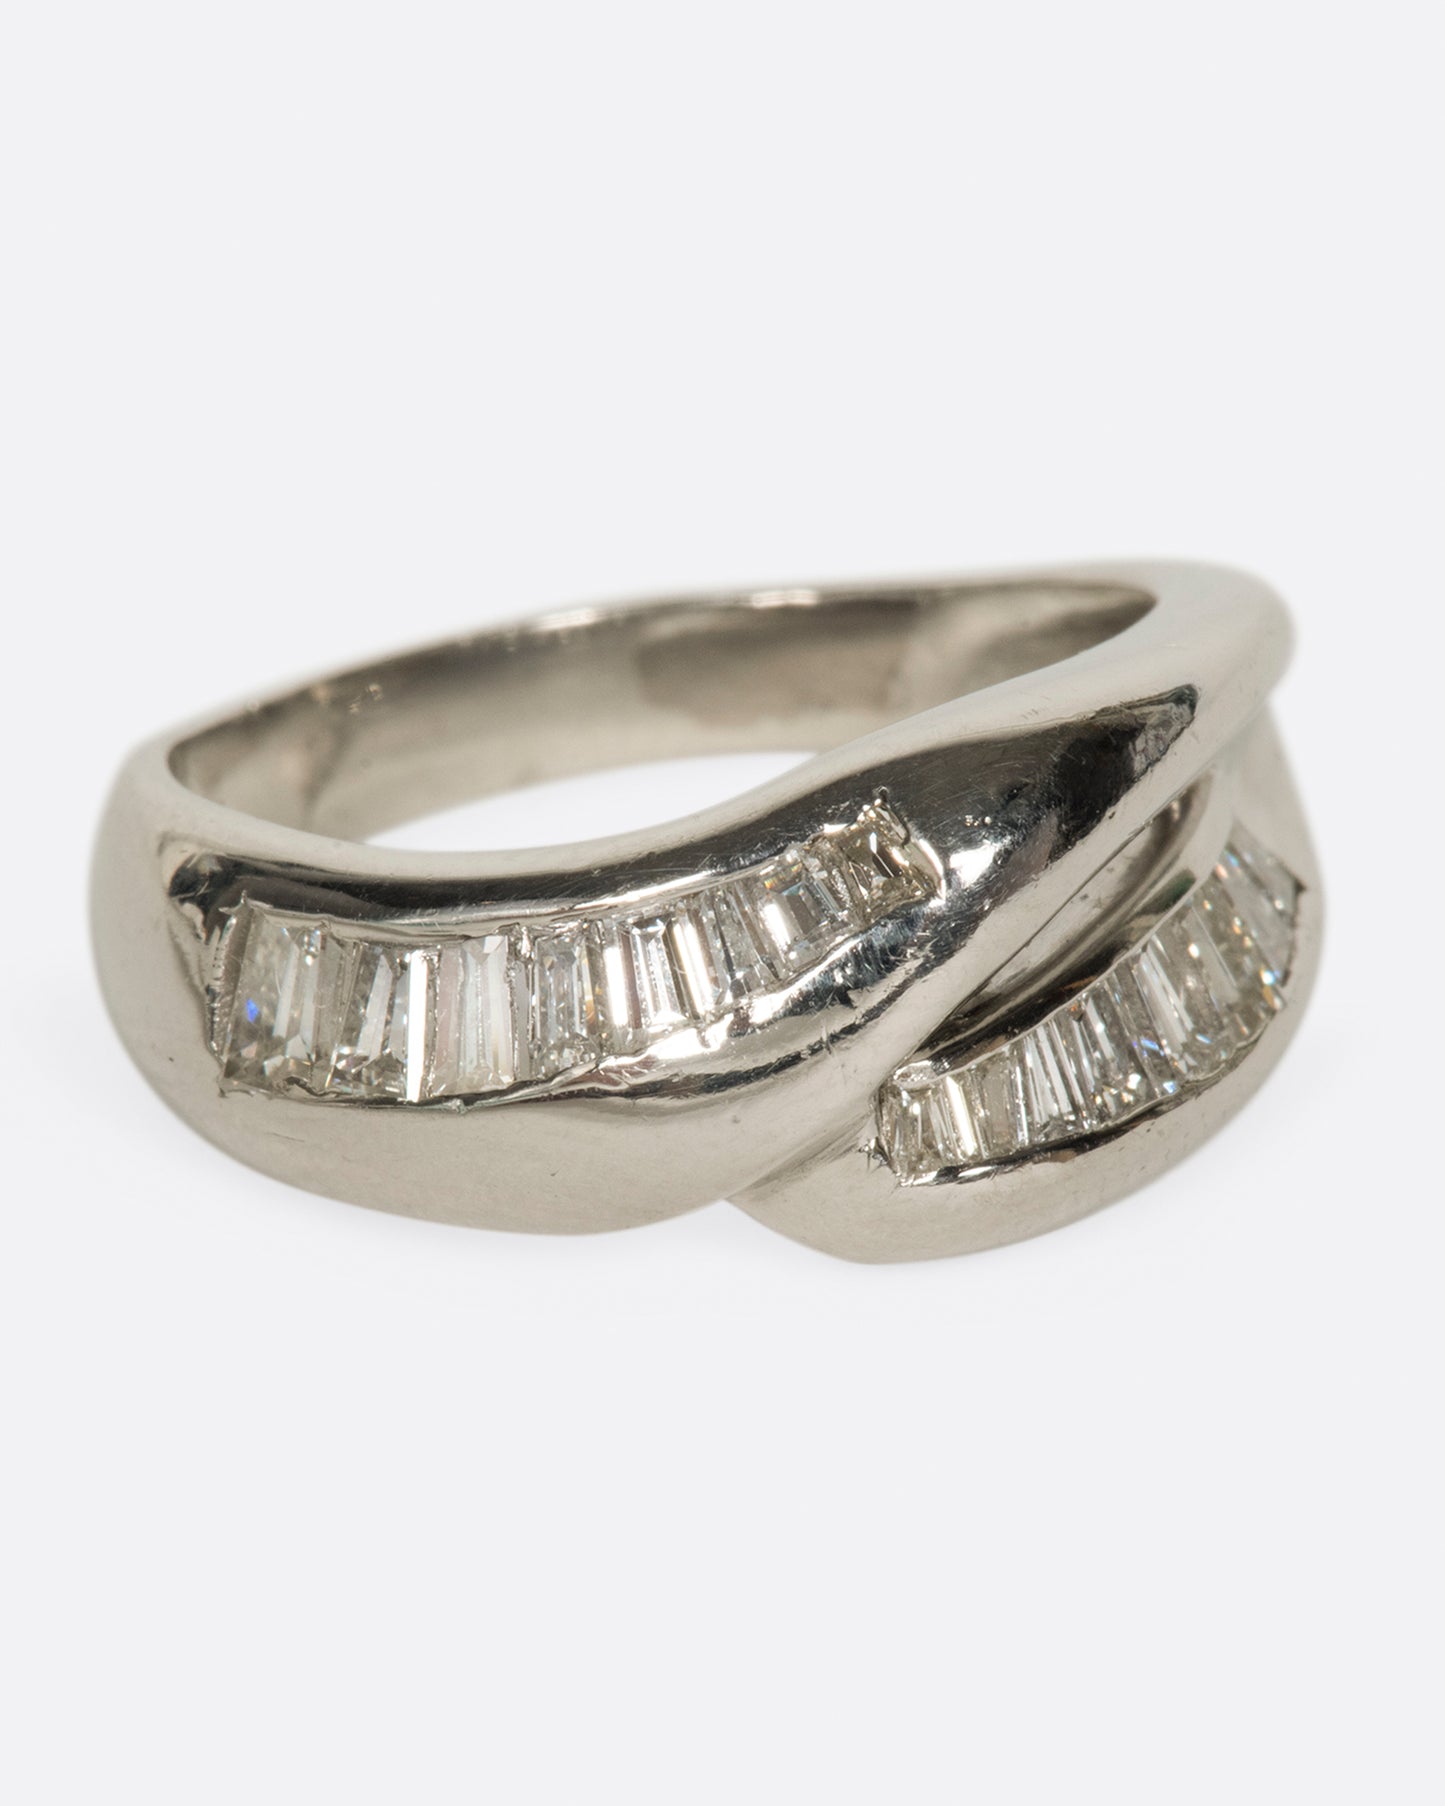 A platinum ring with two arches, lined with baguette diamonds.